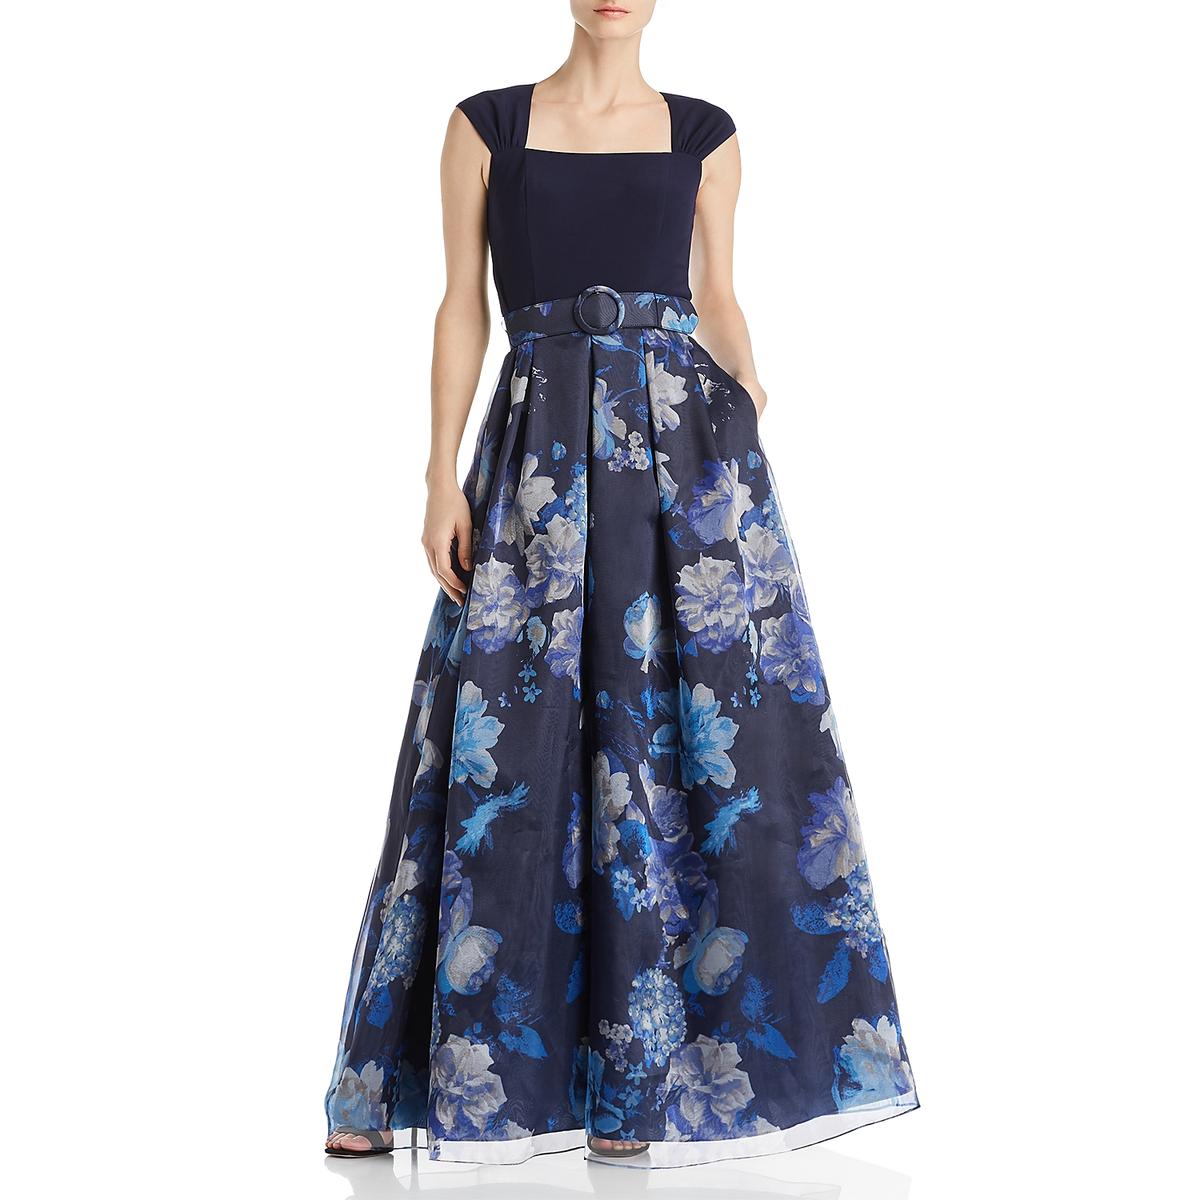 Eliza J Womens Navy Floral Formal A-Line Evening Dress Gown 4 BHFO 7993 ...